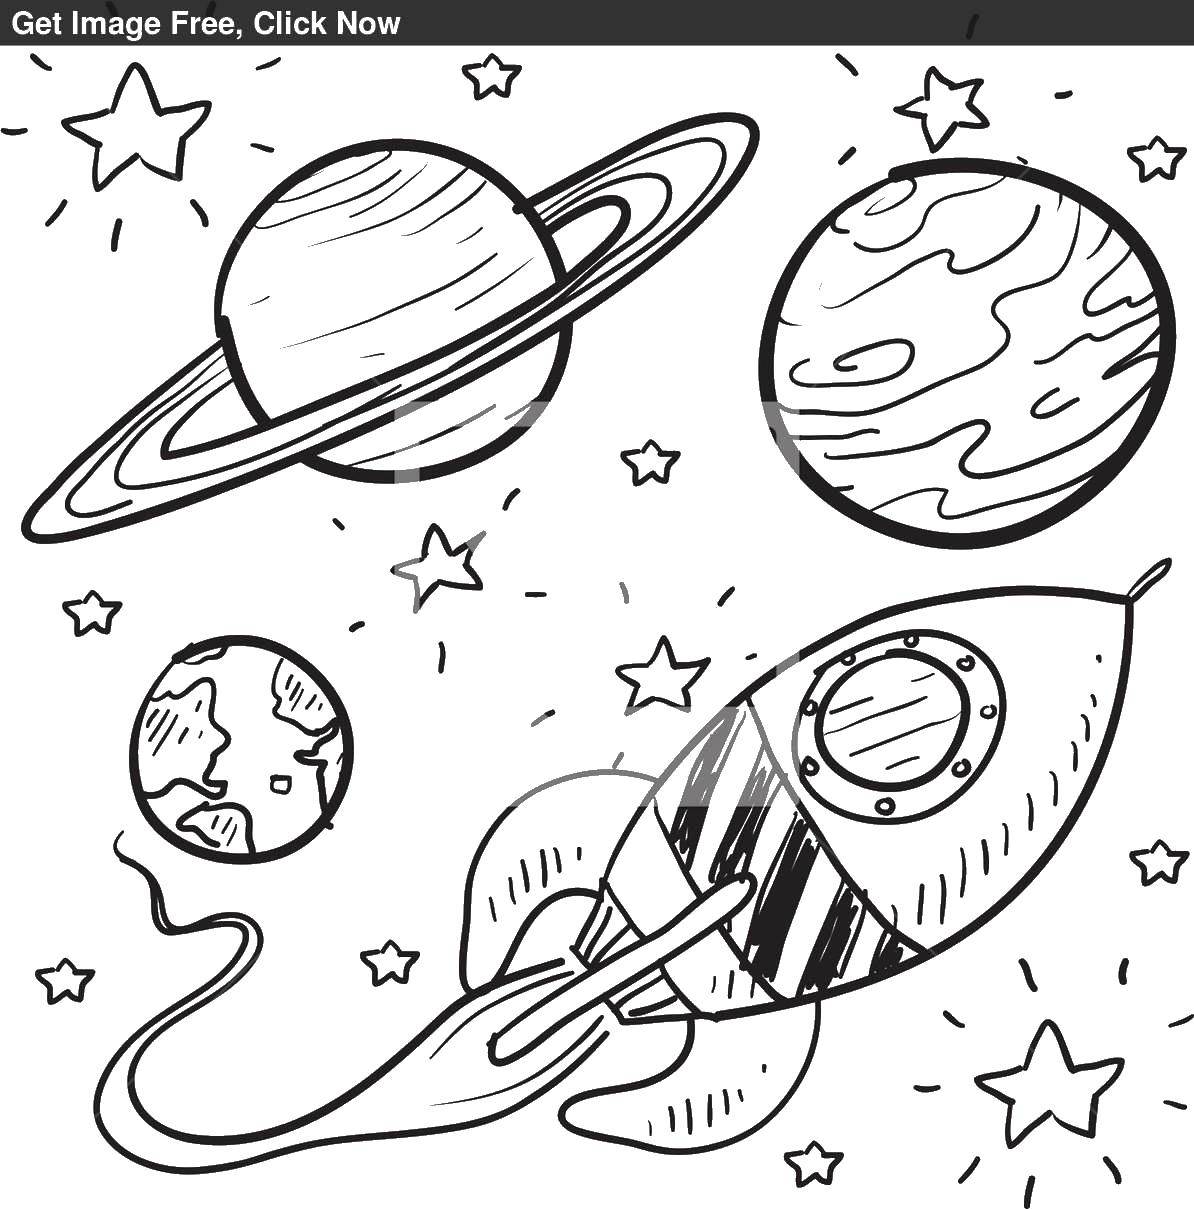 Coloring Rocket among the planets. Category rockets. Tags:  rockets, planets, sky.